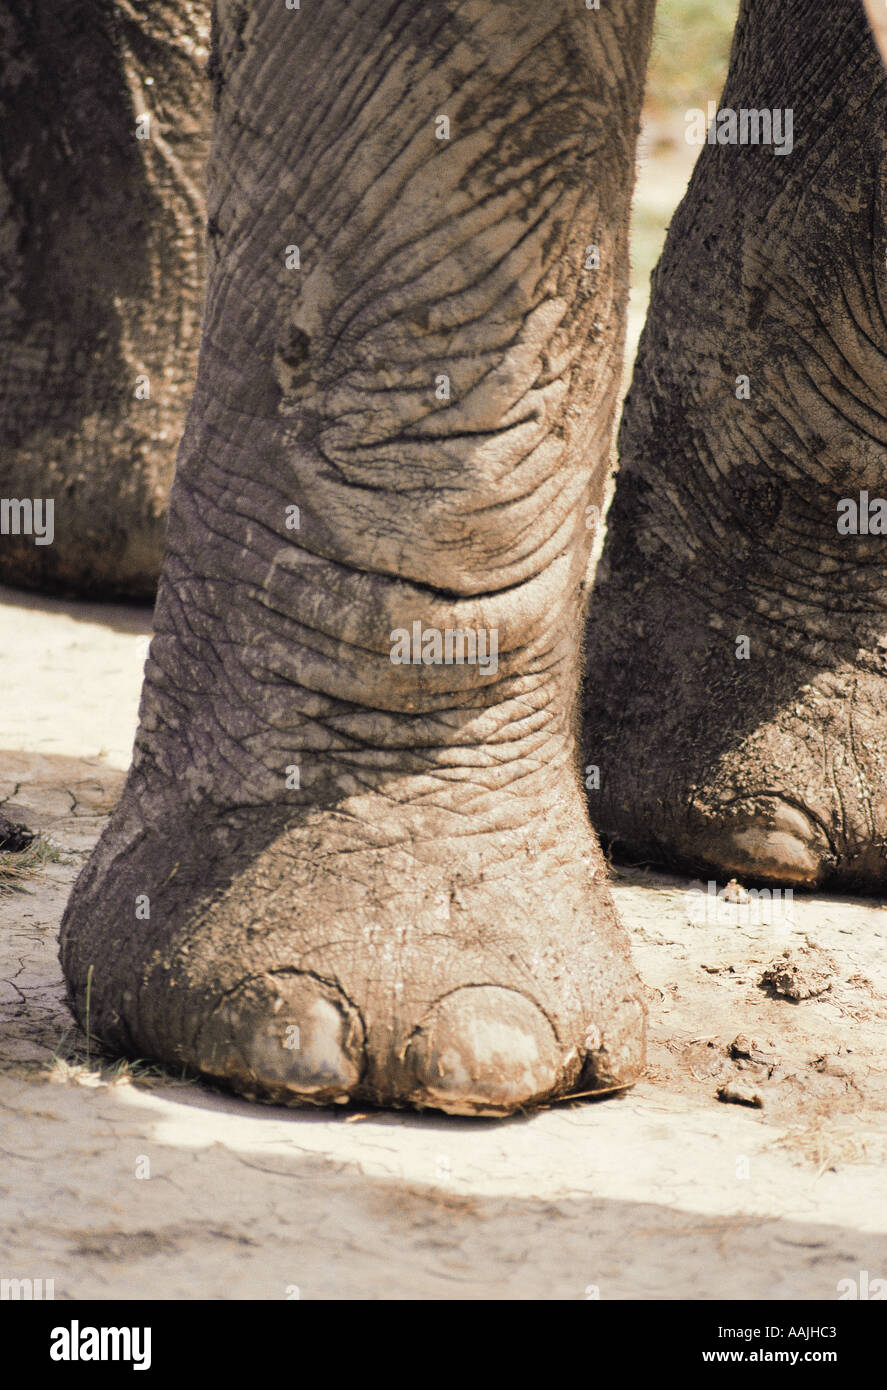 Close up of wild elephant s foot showing toenails and ankle Ngorongoro Crater Tanzania East Africa Stock Photo